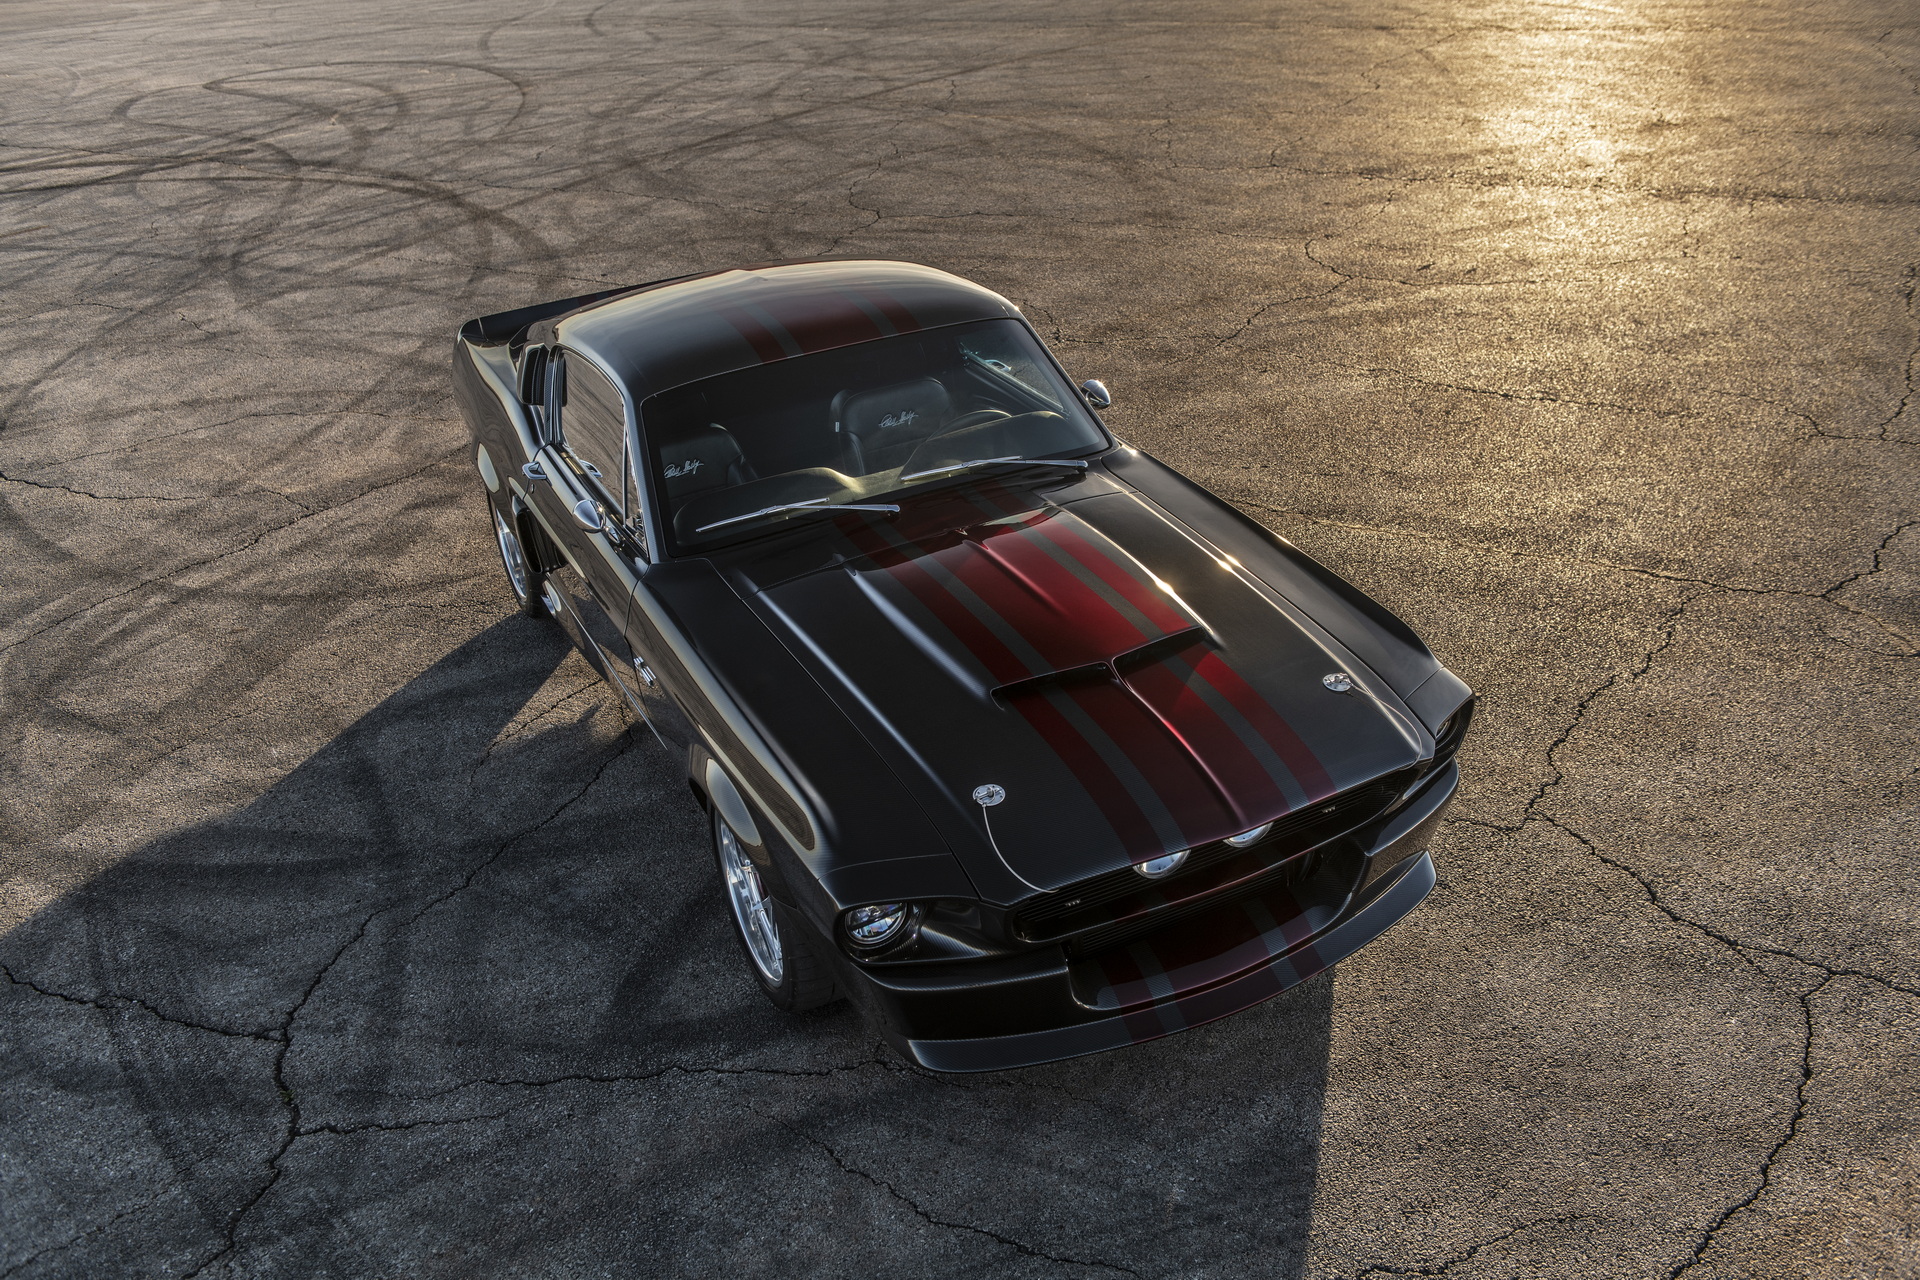 Classic Recreations’ Shelby Mustang GT500 CR Is An 810 HP Carbon Fiber ...